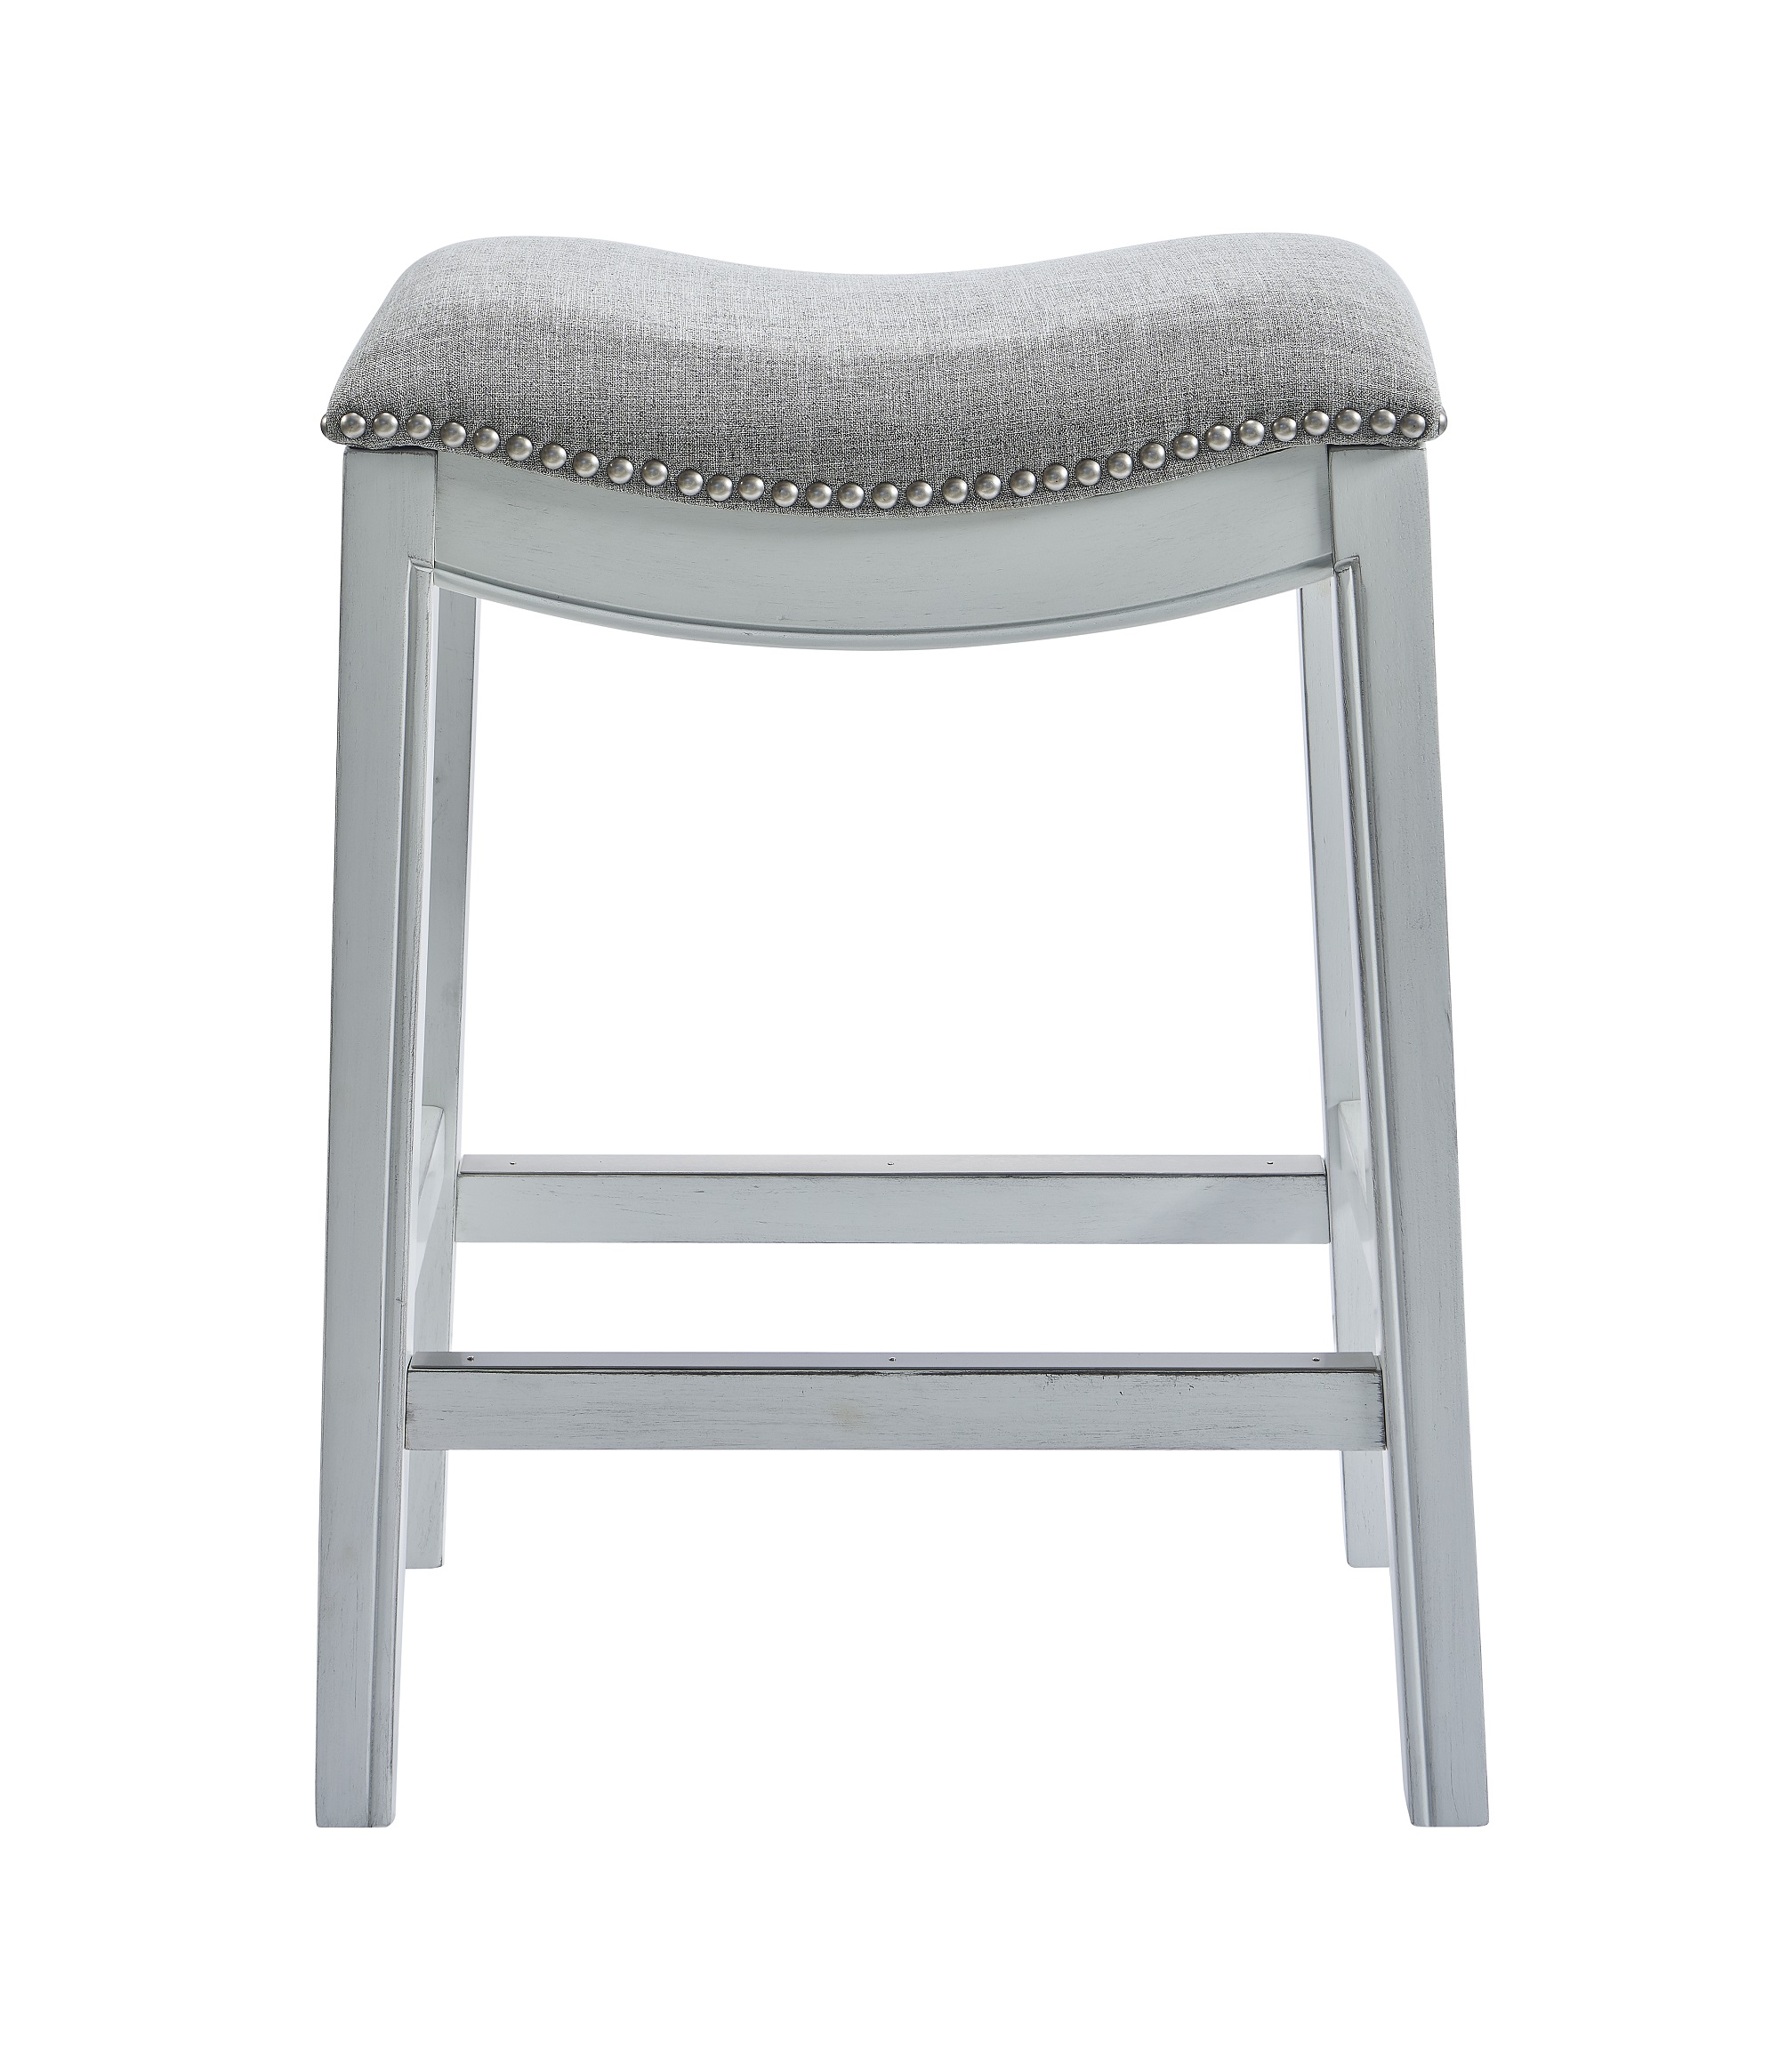 Counter Height Saddle Style Counter Stool with Grey Fabric and Nail head Trim